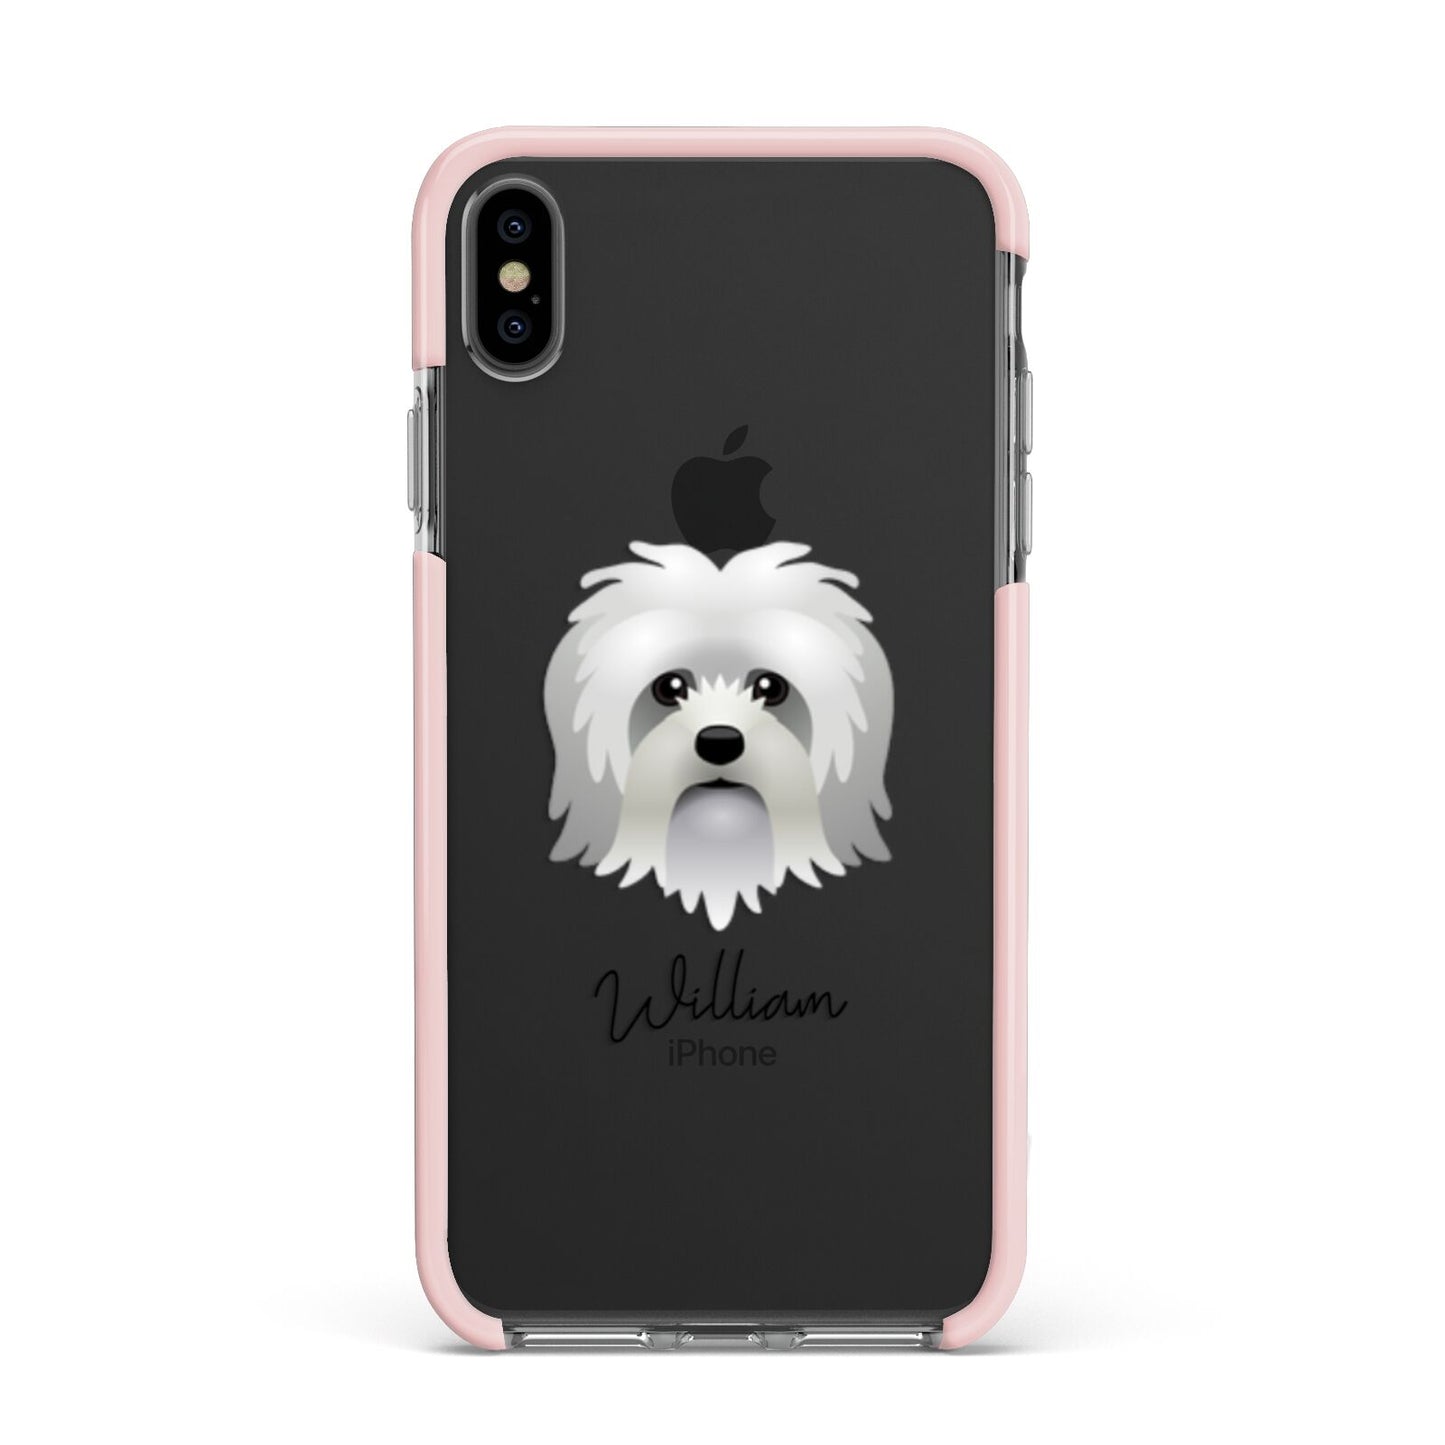 Lo wchen Personalised Apple iPhone Xs Max Impact Case Pink Edge on Black Phone